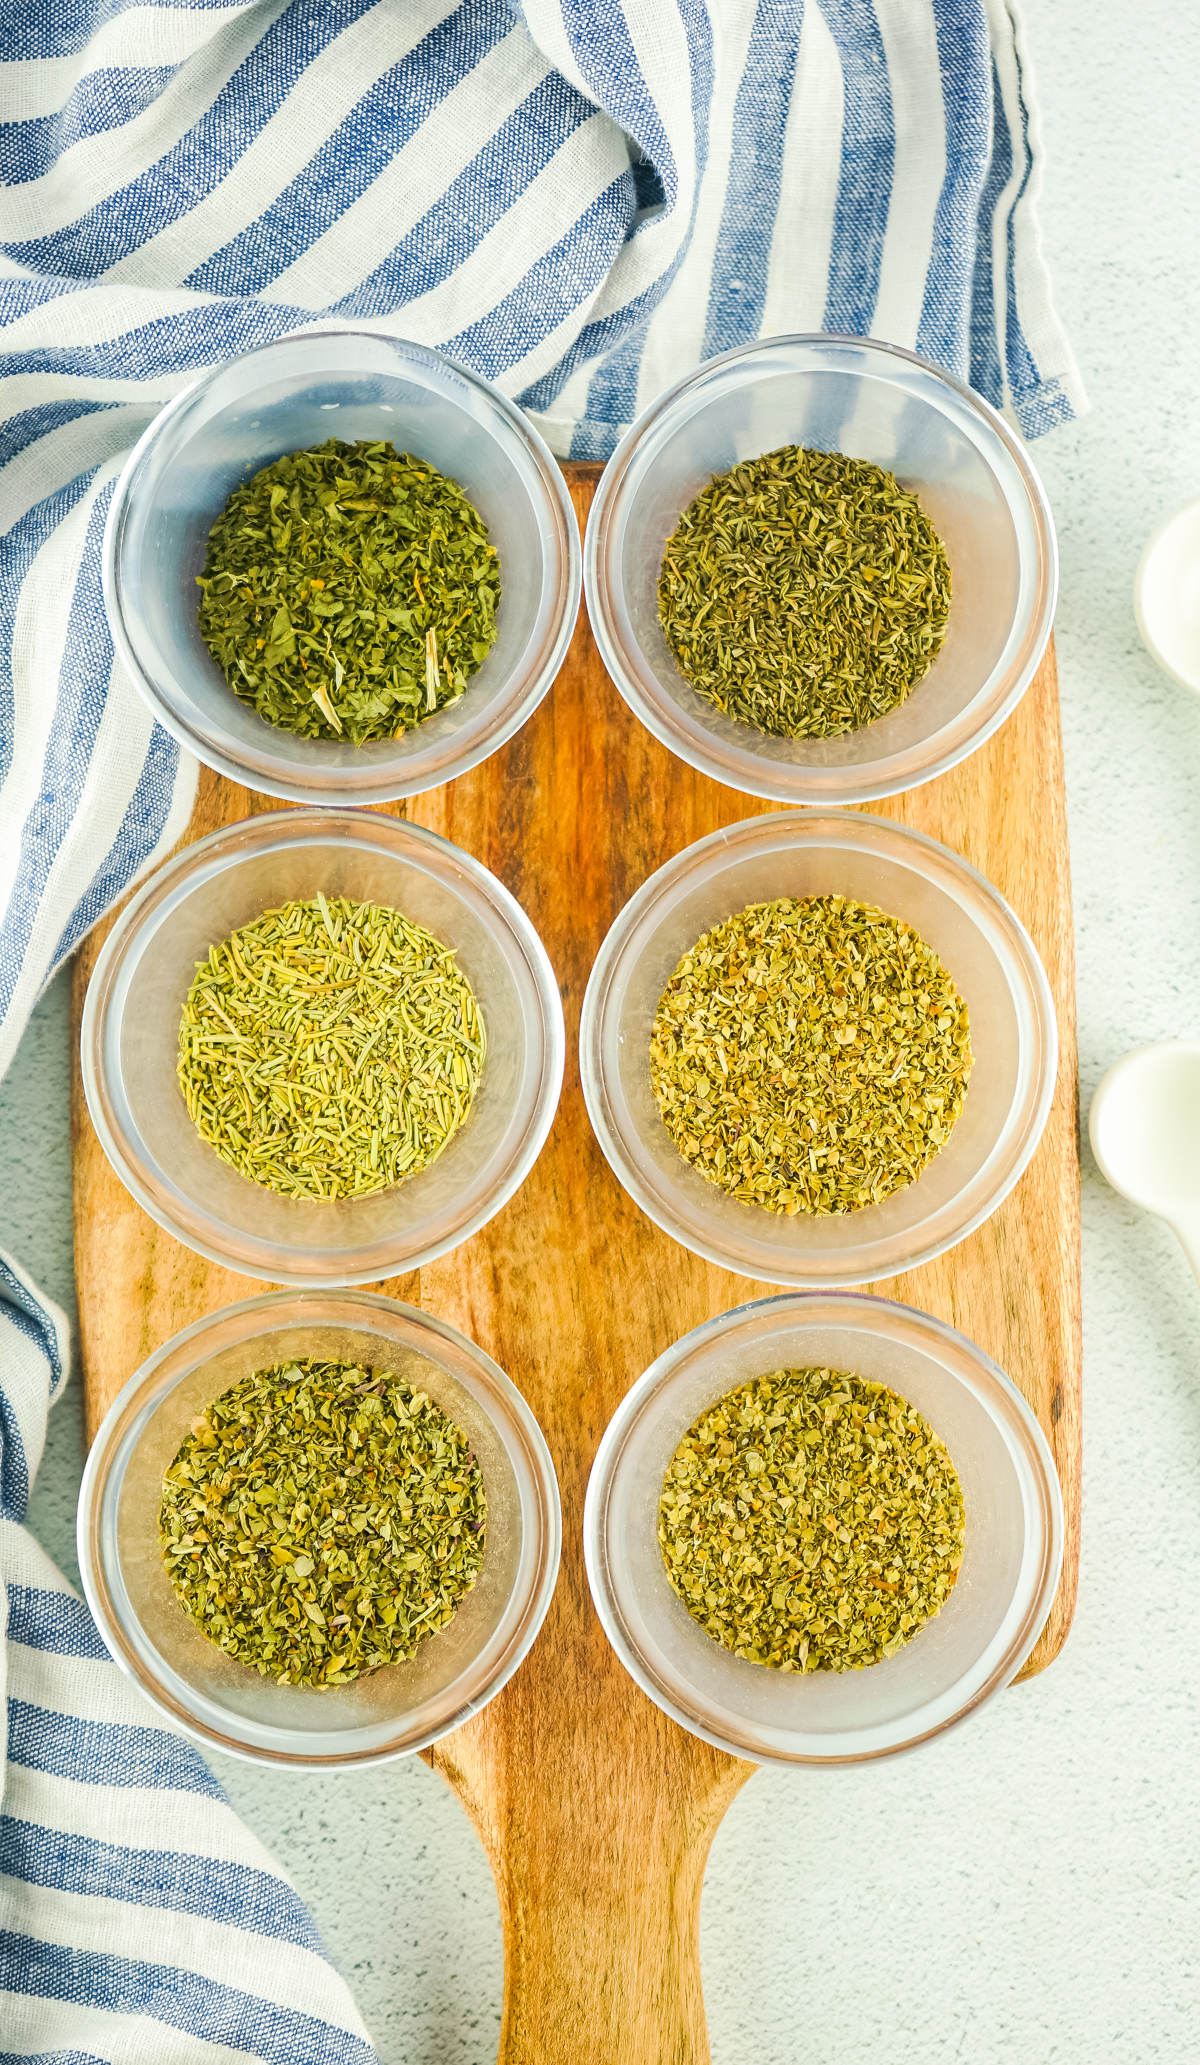 dried herbs in bowls to give food delicious Italian flavors